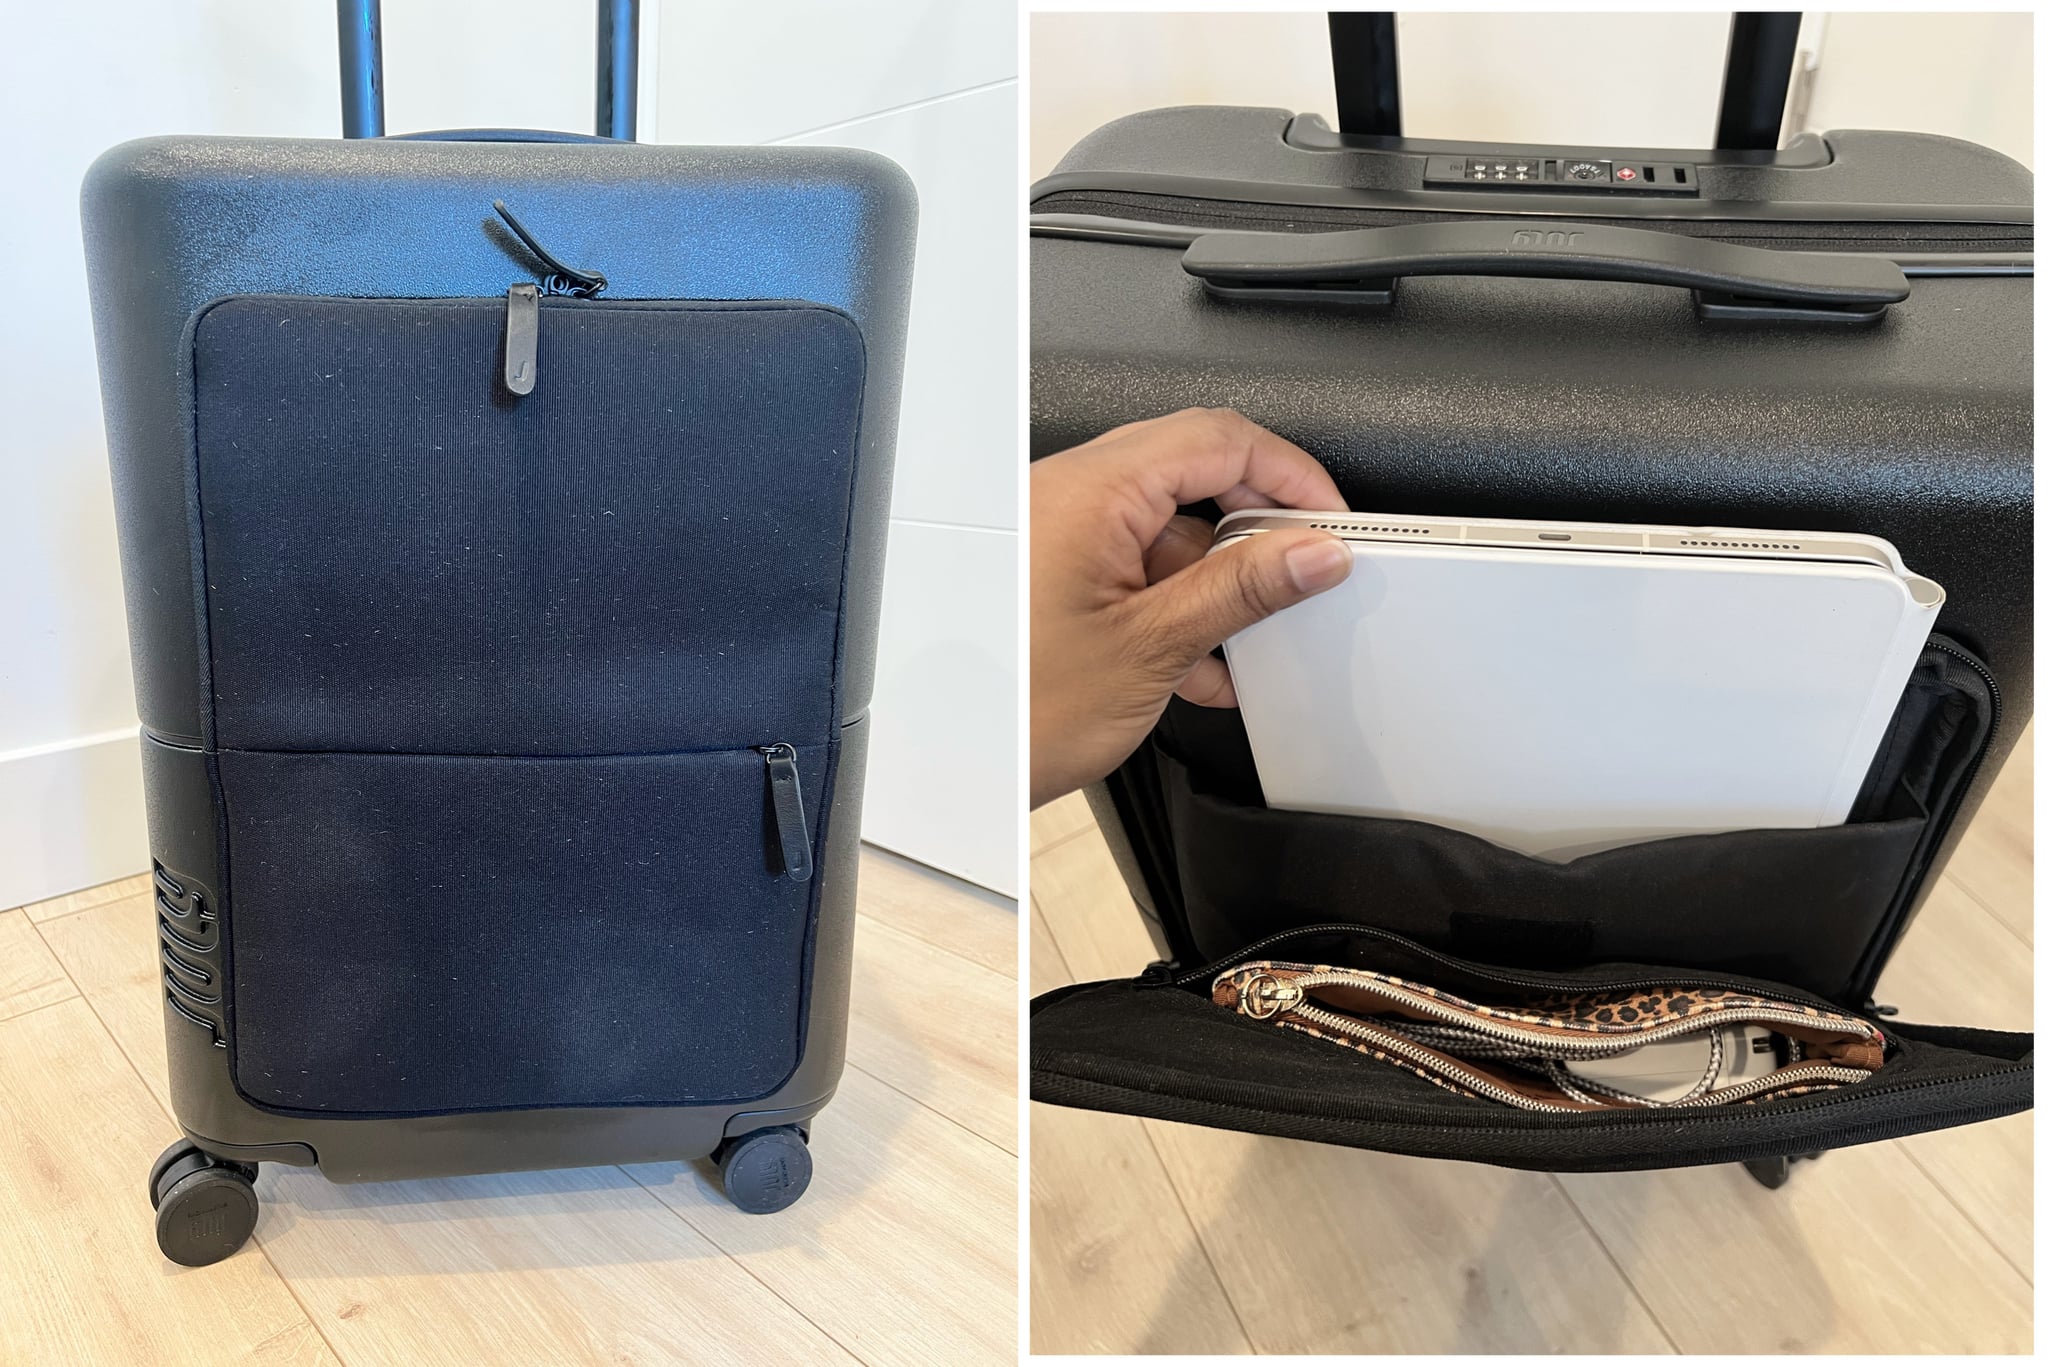 The July Carry-On Pro suitcase in charcoal with laptop sleeve. Laptop sleeve has iPad and an essentials pouch stored in it.